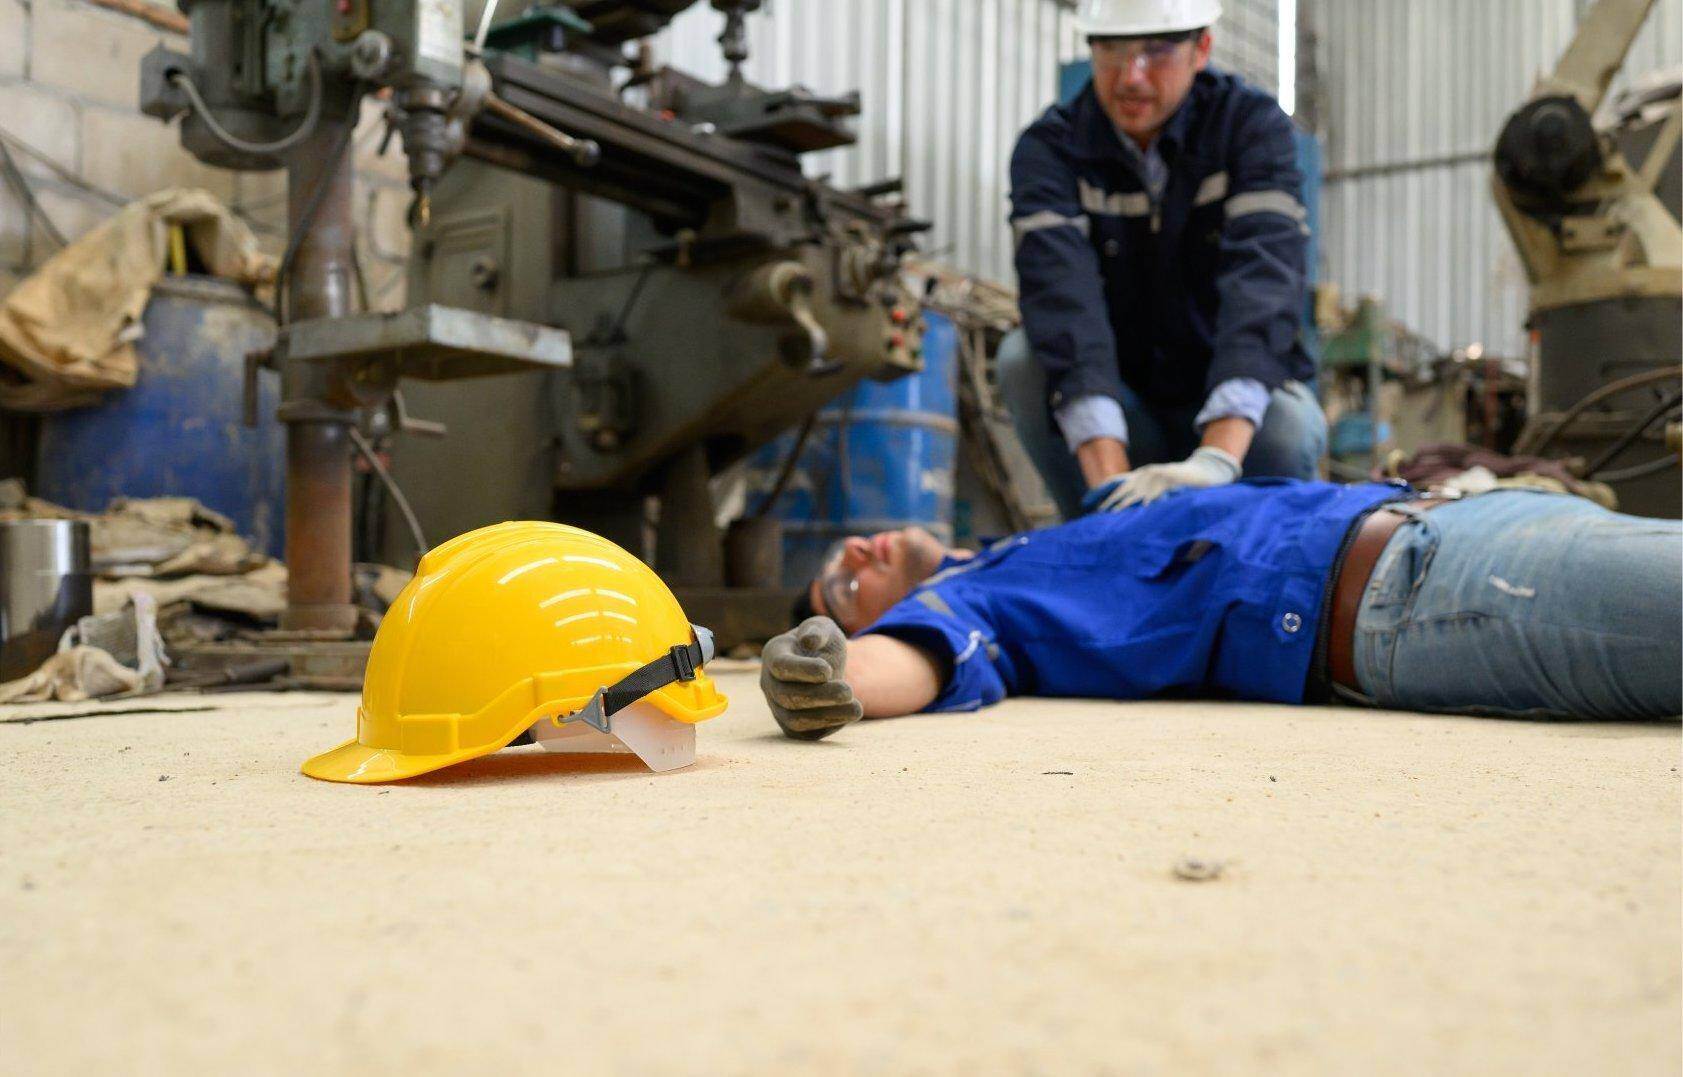 An unconscious man who has been injured on the job who will file for workers compensation in Dublin, Georgia